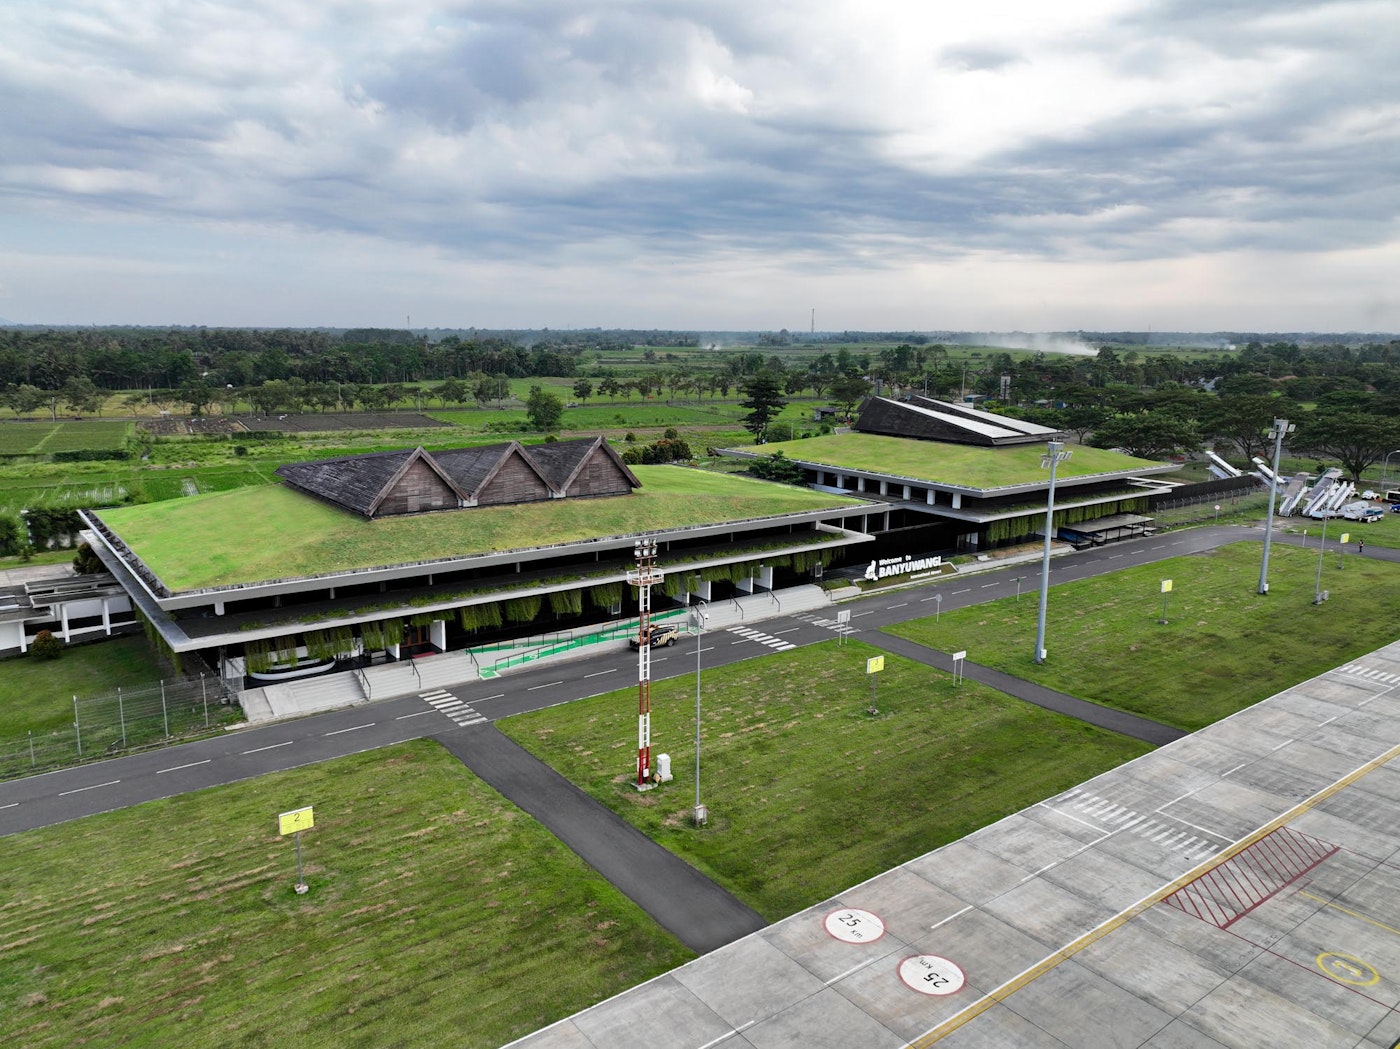 General view of the domestic airport that serves more than 1,100 passengers per day. (Photo by Mario Wibowo)